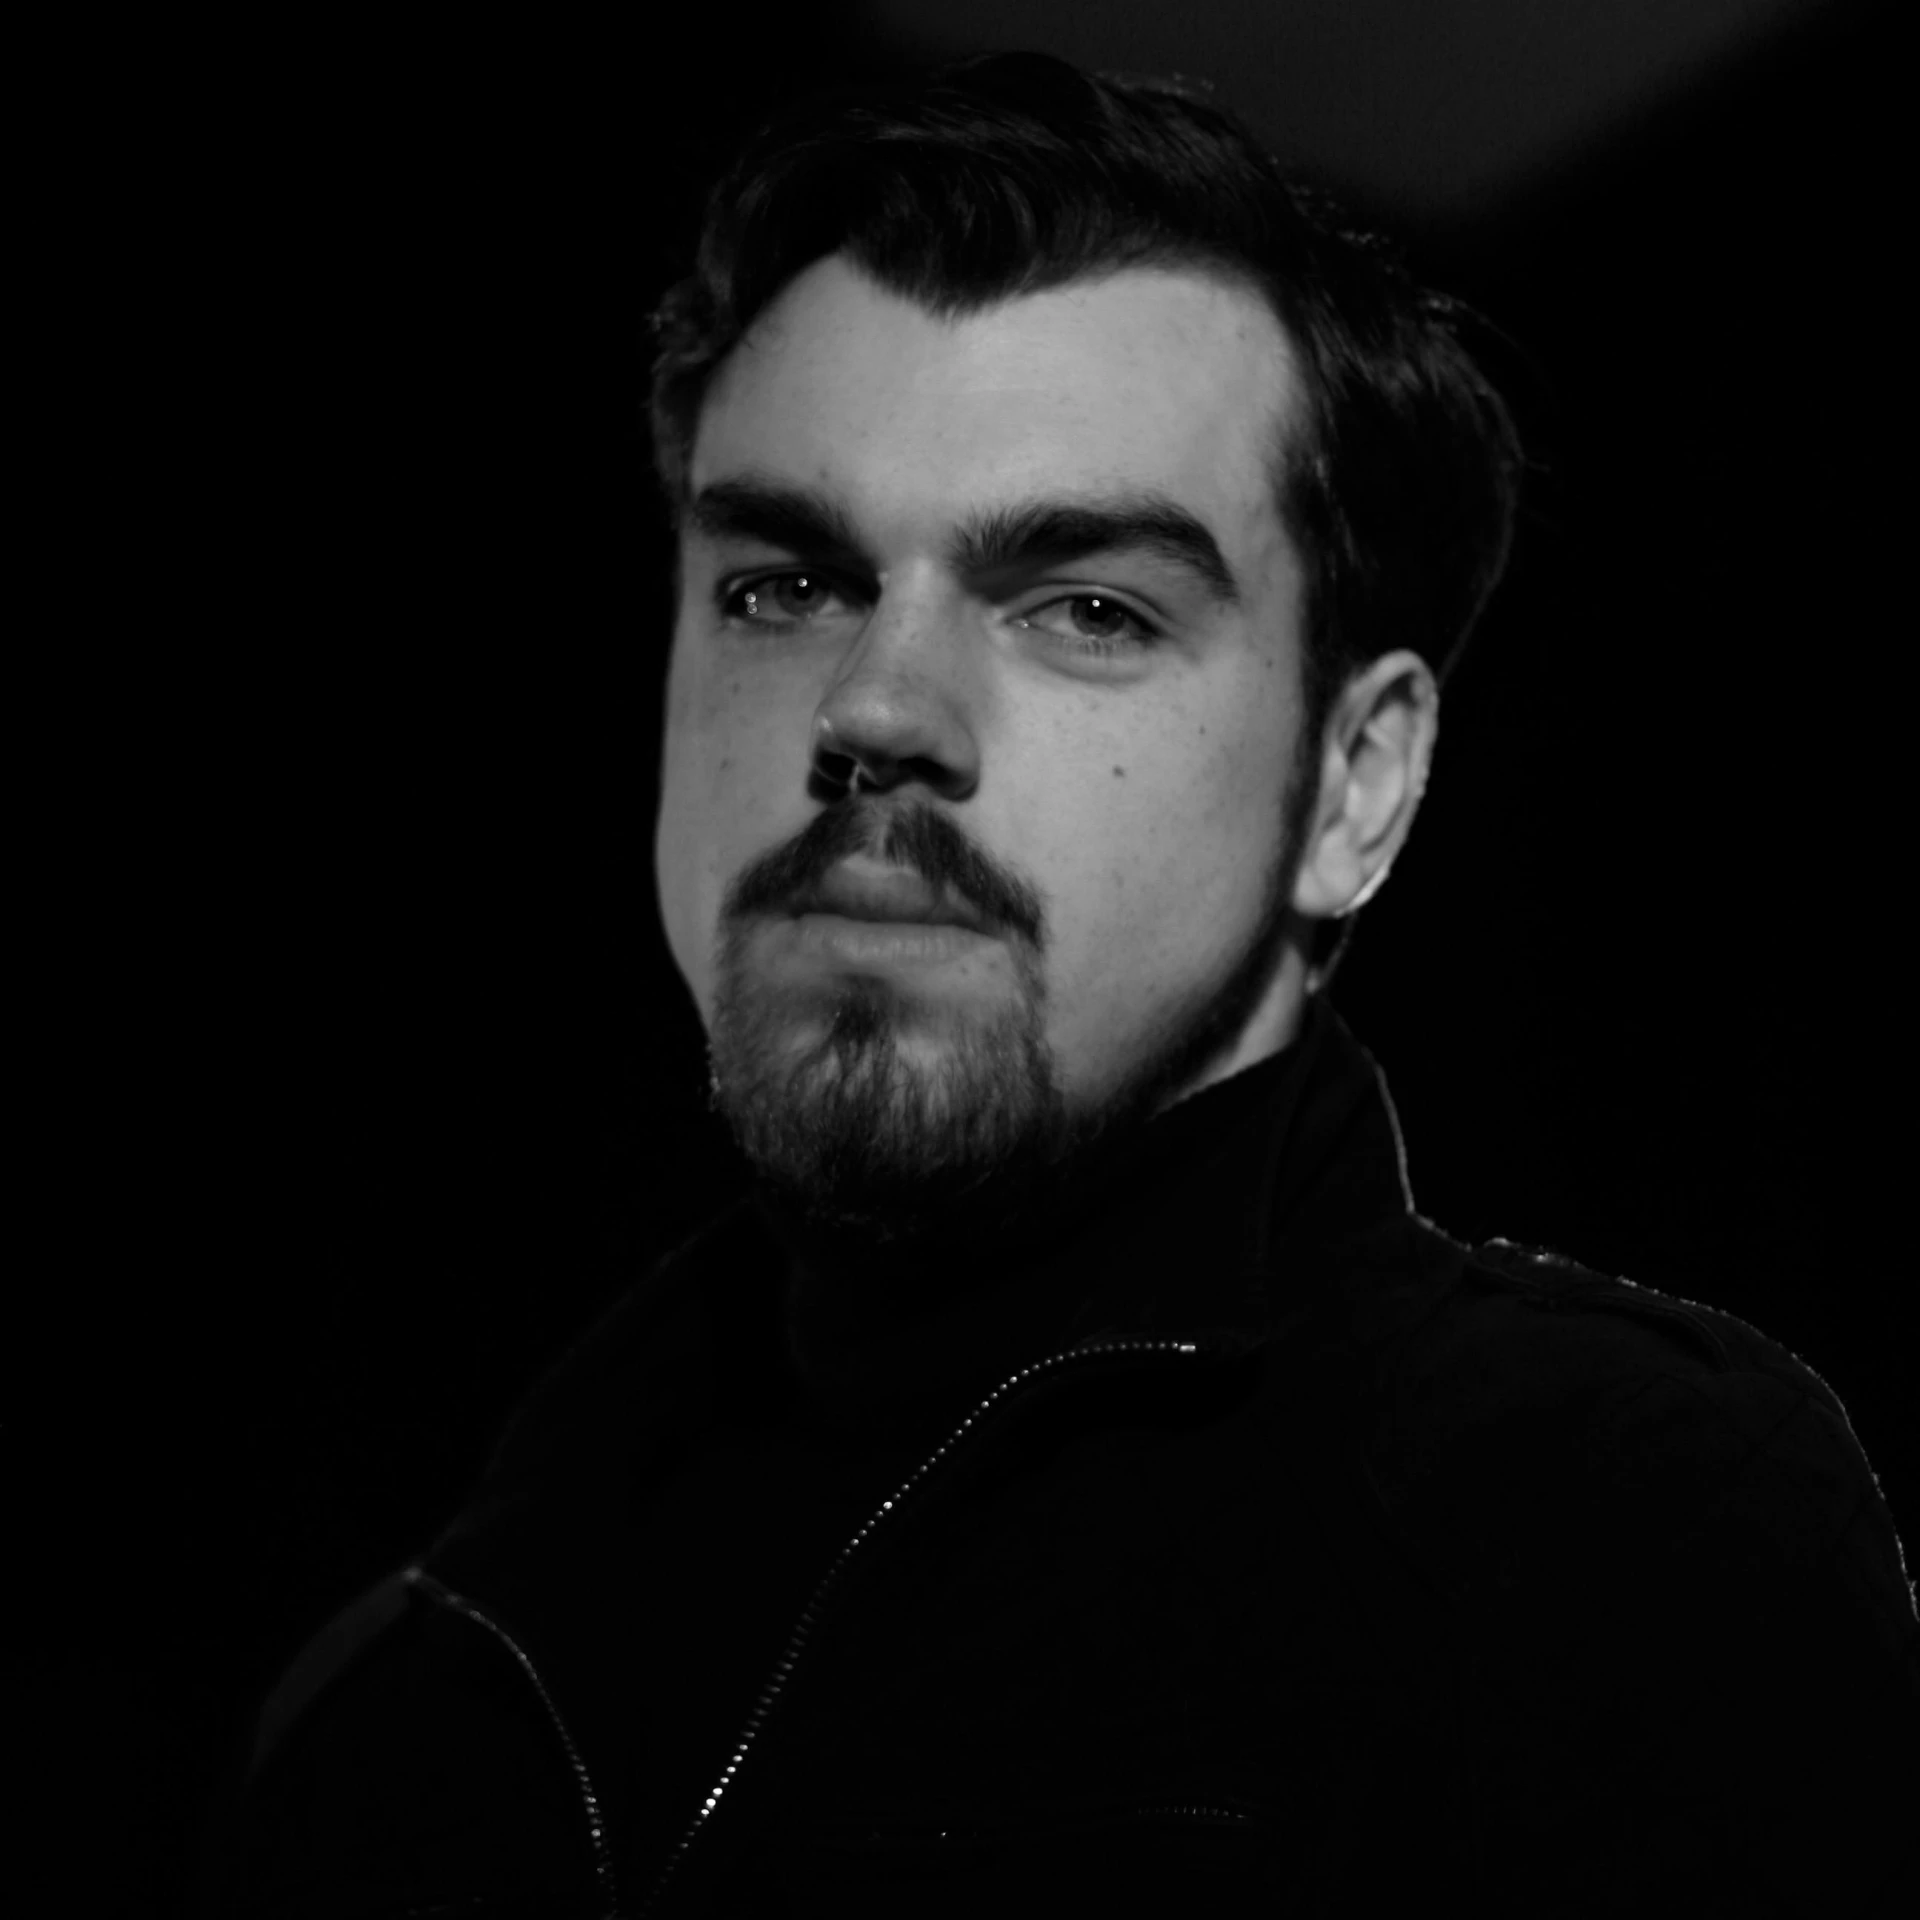 a black and white photo of a man with a beard, an album cover, unsplash, tom burke, ethan van sciver, a man wearing a black jacket, dark. no text